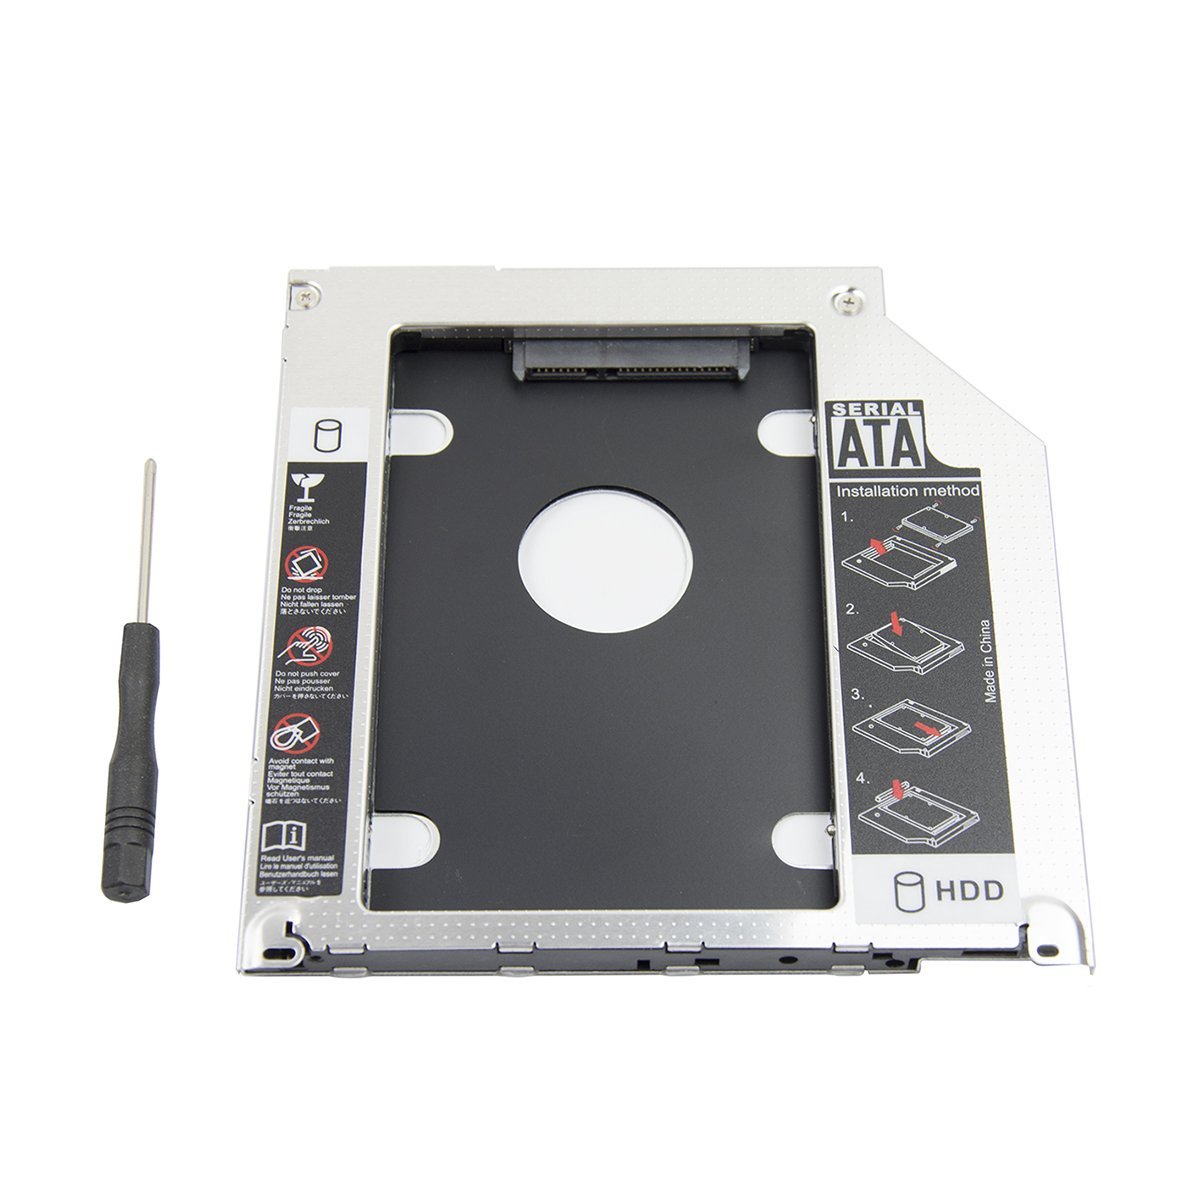 Book Cover HIGHFINE 2nd 2.5'' SATA HDD SSD Hard Drive Disk DVD CD ROM Optical SuperDrive Caddy Tray Adapter for Apple Unibody MacBook/MacBook Pro 13 15 17 Early mid Late 2008 2009 2010 2011 2012.etc